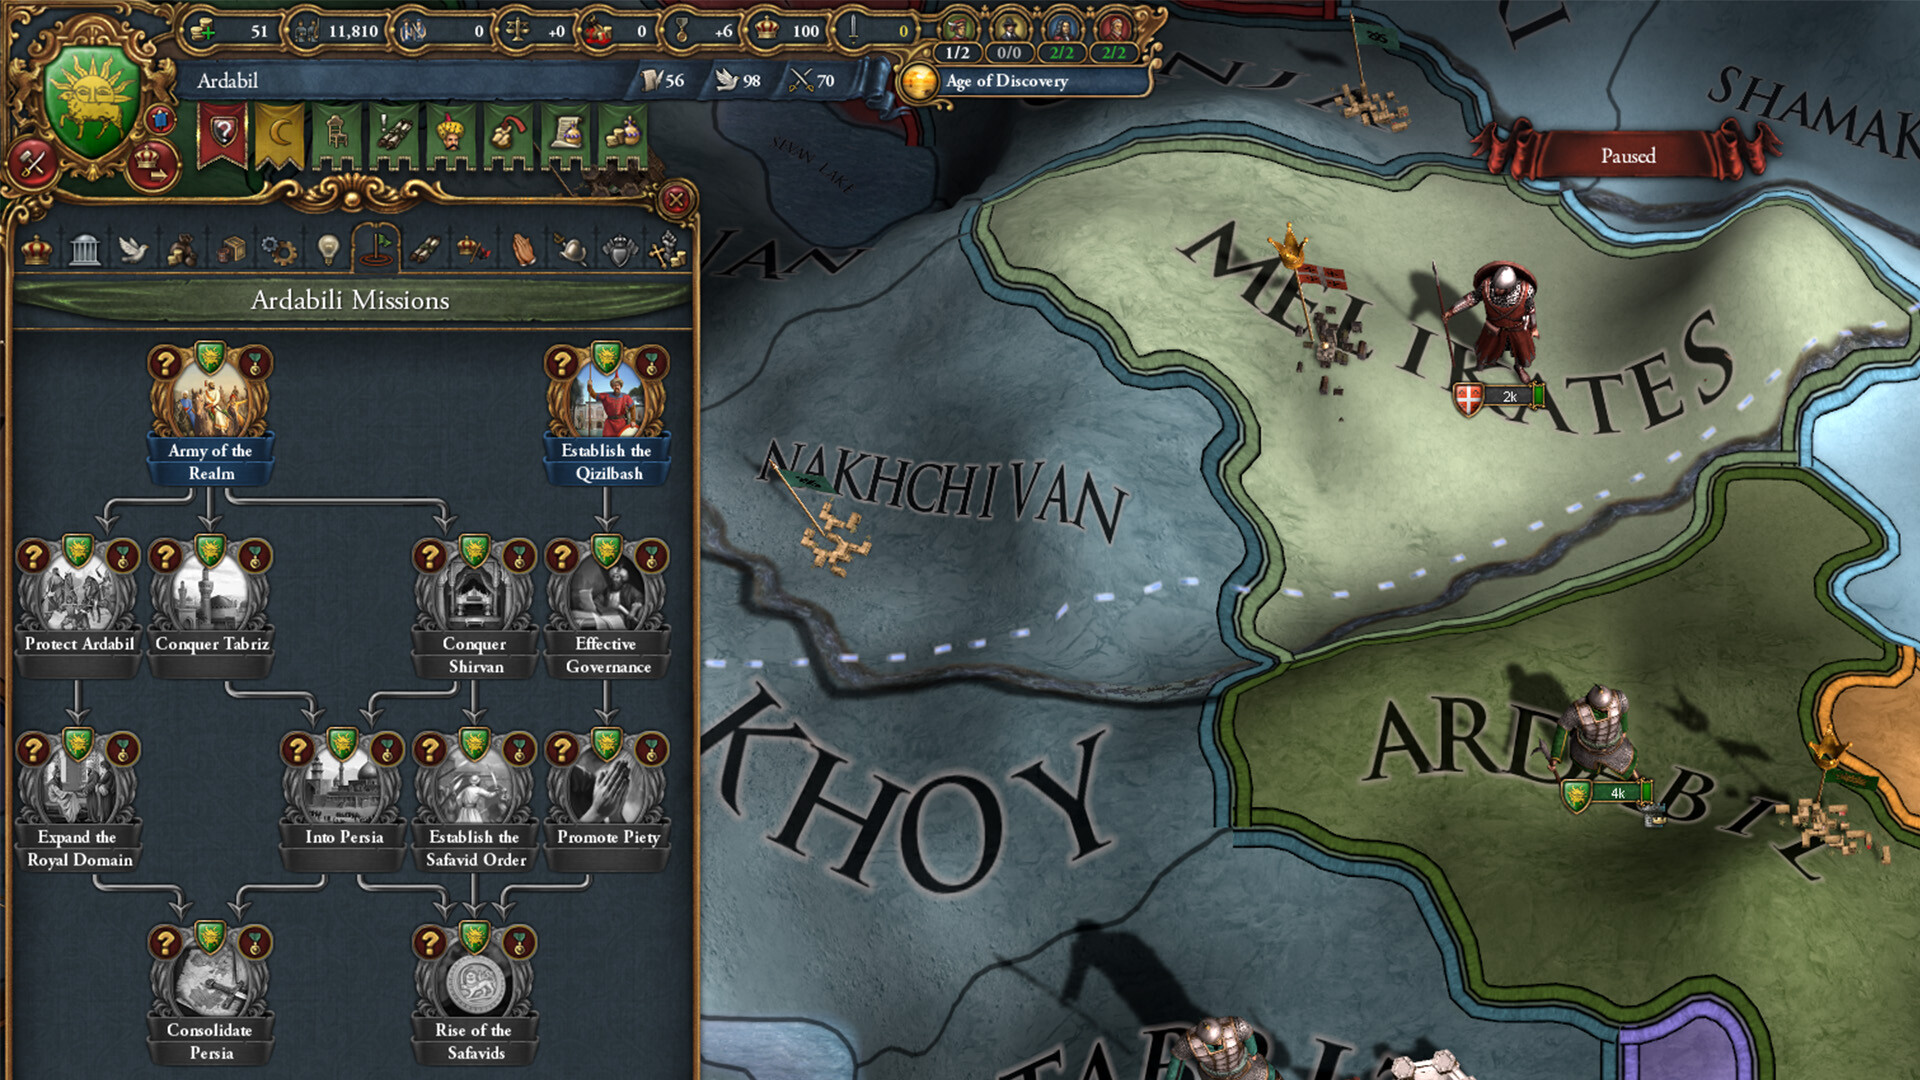 Immersion Pack - Europa Universalis IV: King of Kings Featured Screenshot #1